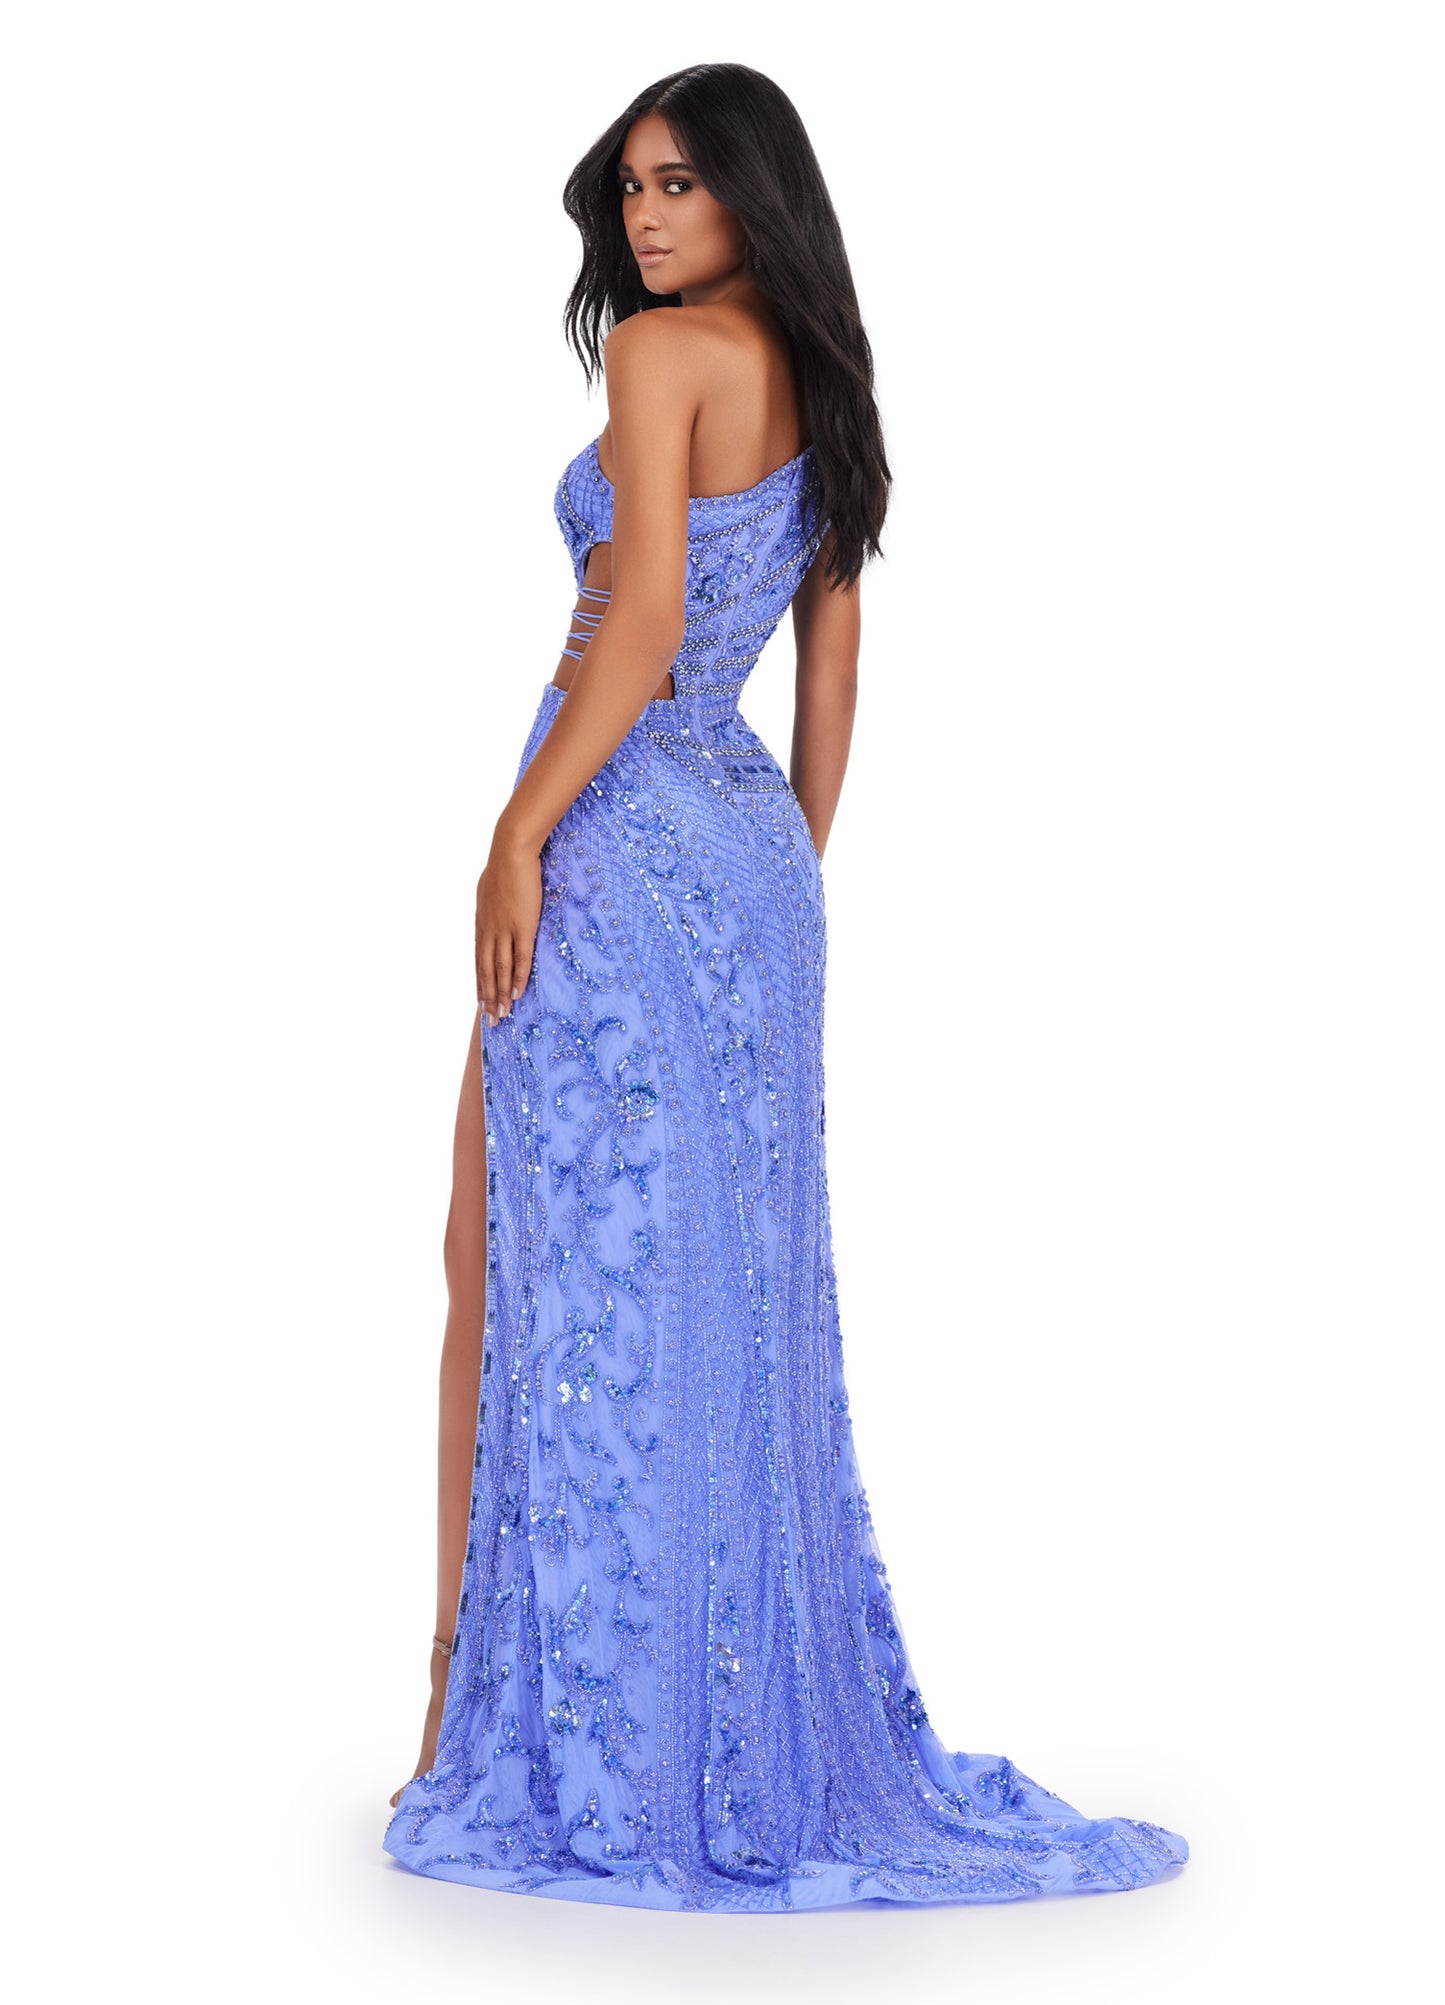 Ashley Lauren 11489 Long Prom Dress Fitted One Shoulder Sequin Gown Cut Outs Slit Formal Pageant Gown